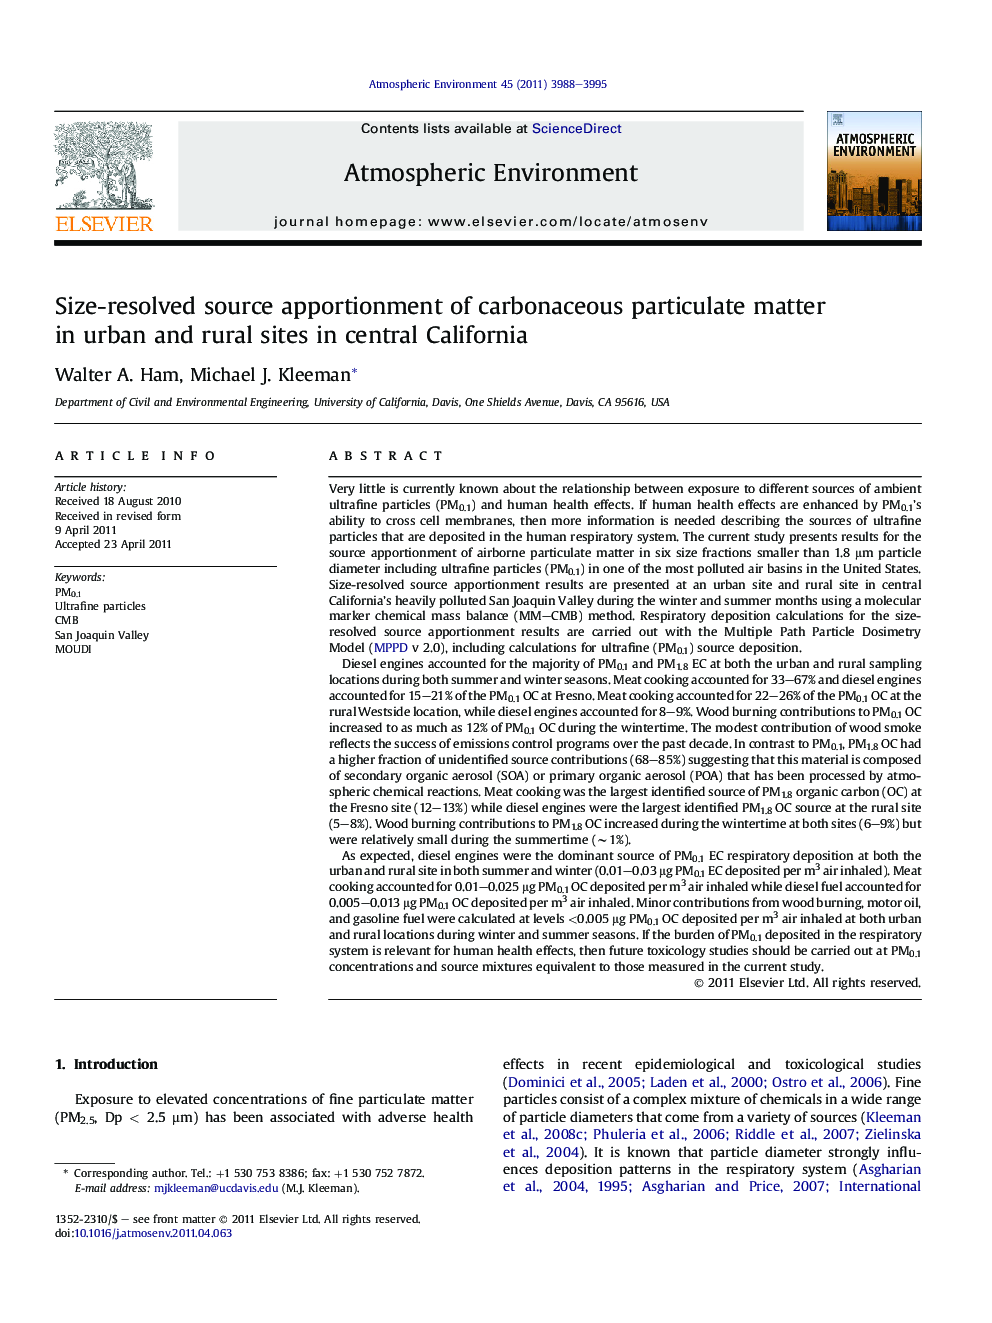 Size-resolved source apportionment of carbonaceous particulate matter in urban and rural sites in central California